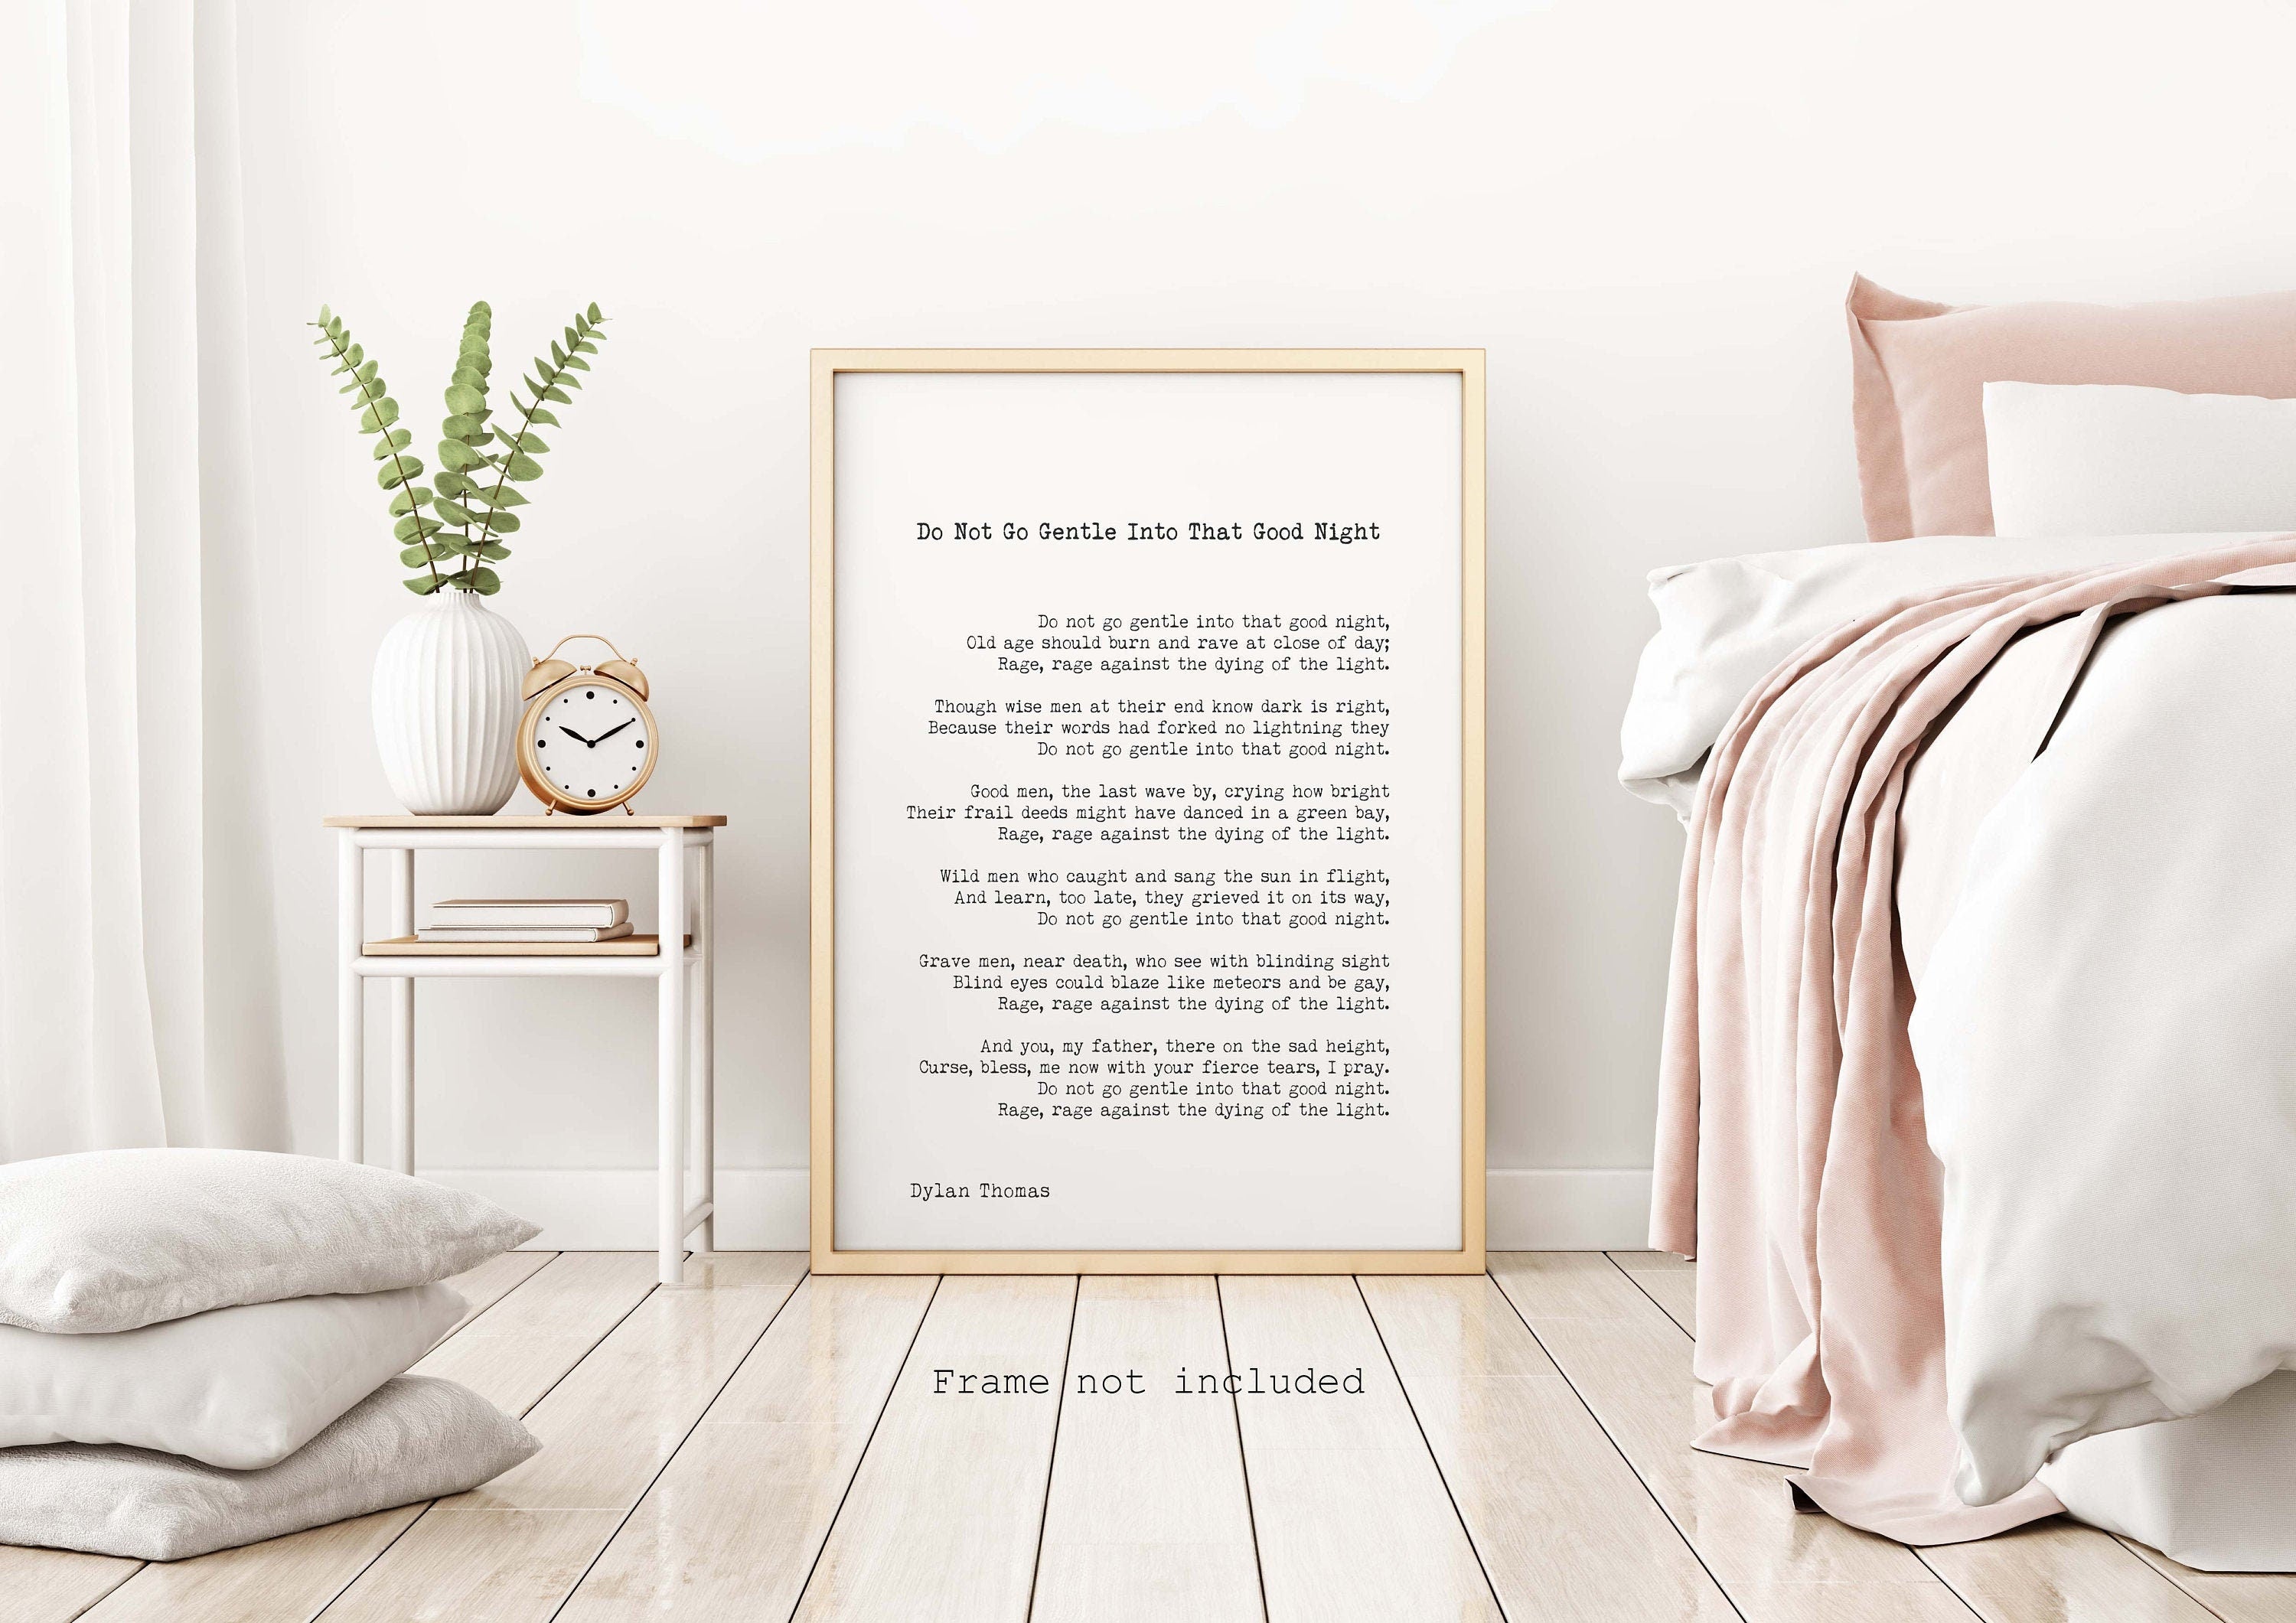 Large Dylan Thomas Poem Print, Do Not Go Gentle Poetry Poster in Black & White for Home Wall Decor